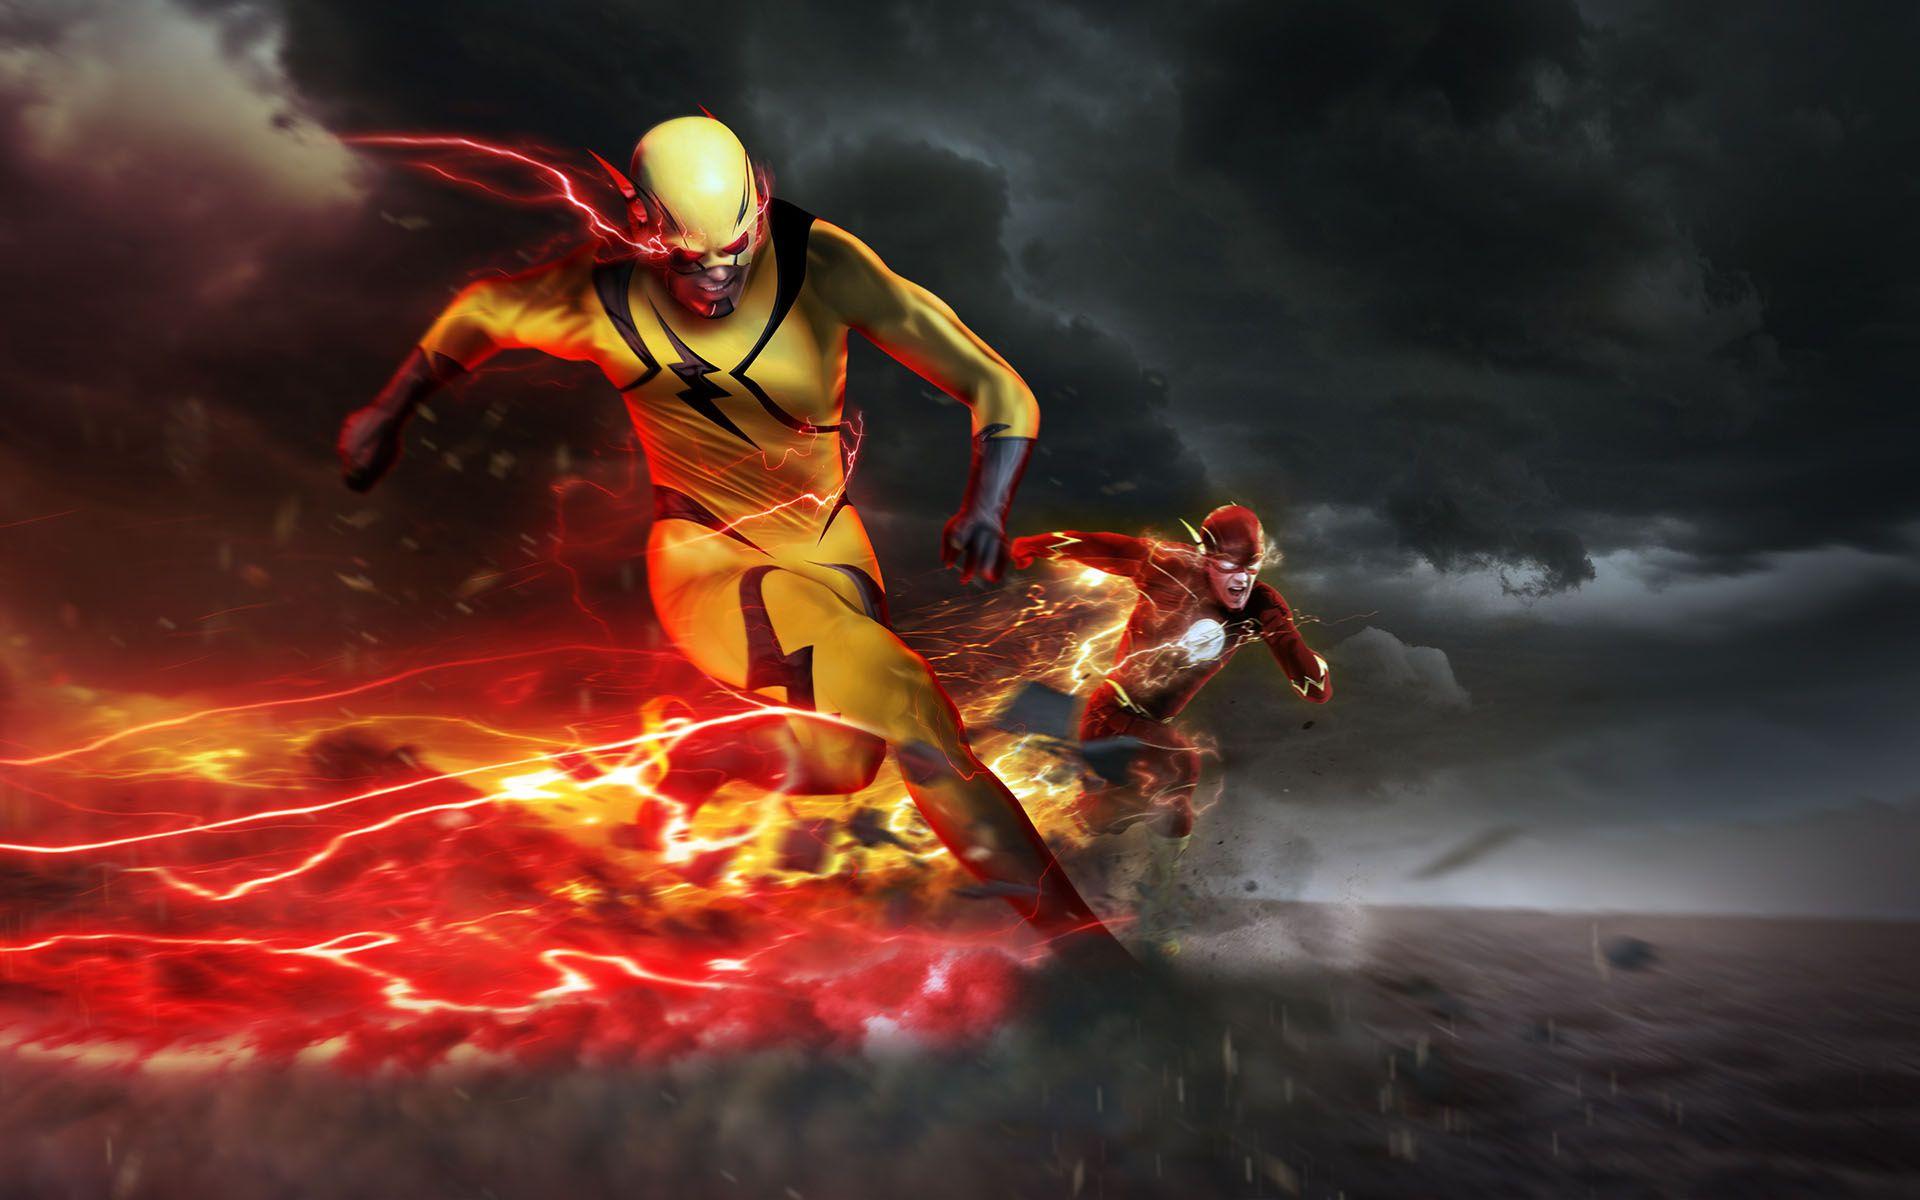 Wallpaper.wiki Image Barry Allen The Flash Download PIC WPD006759